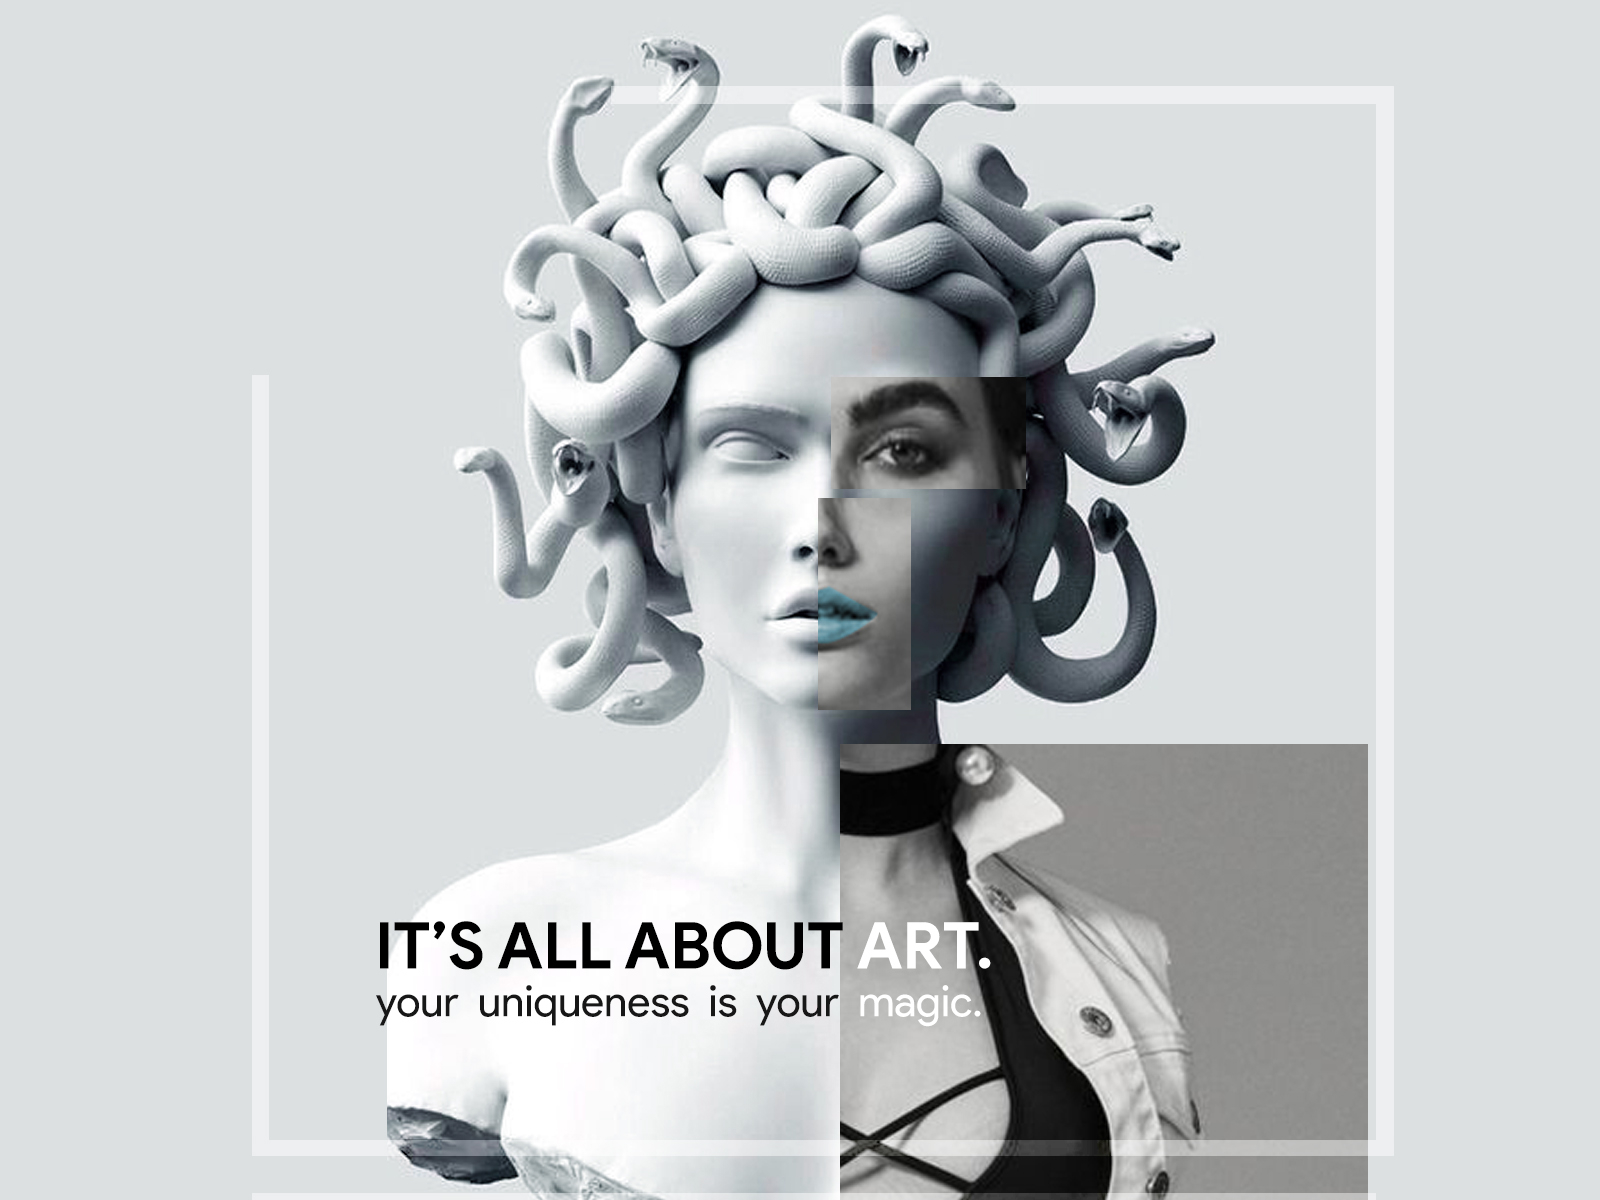 The art of Medusa by sepehr parsa on Dribbble